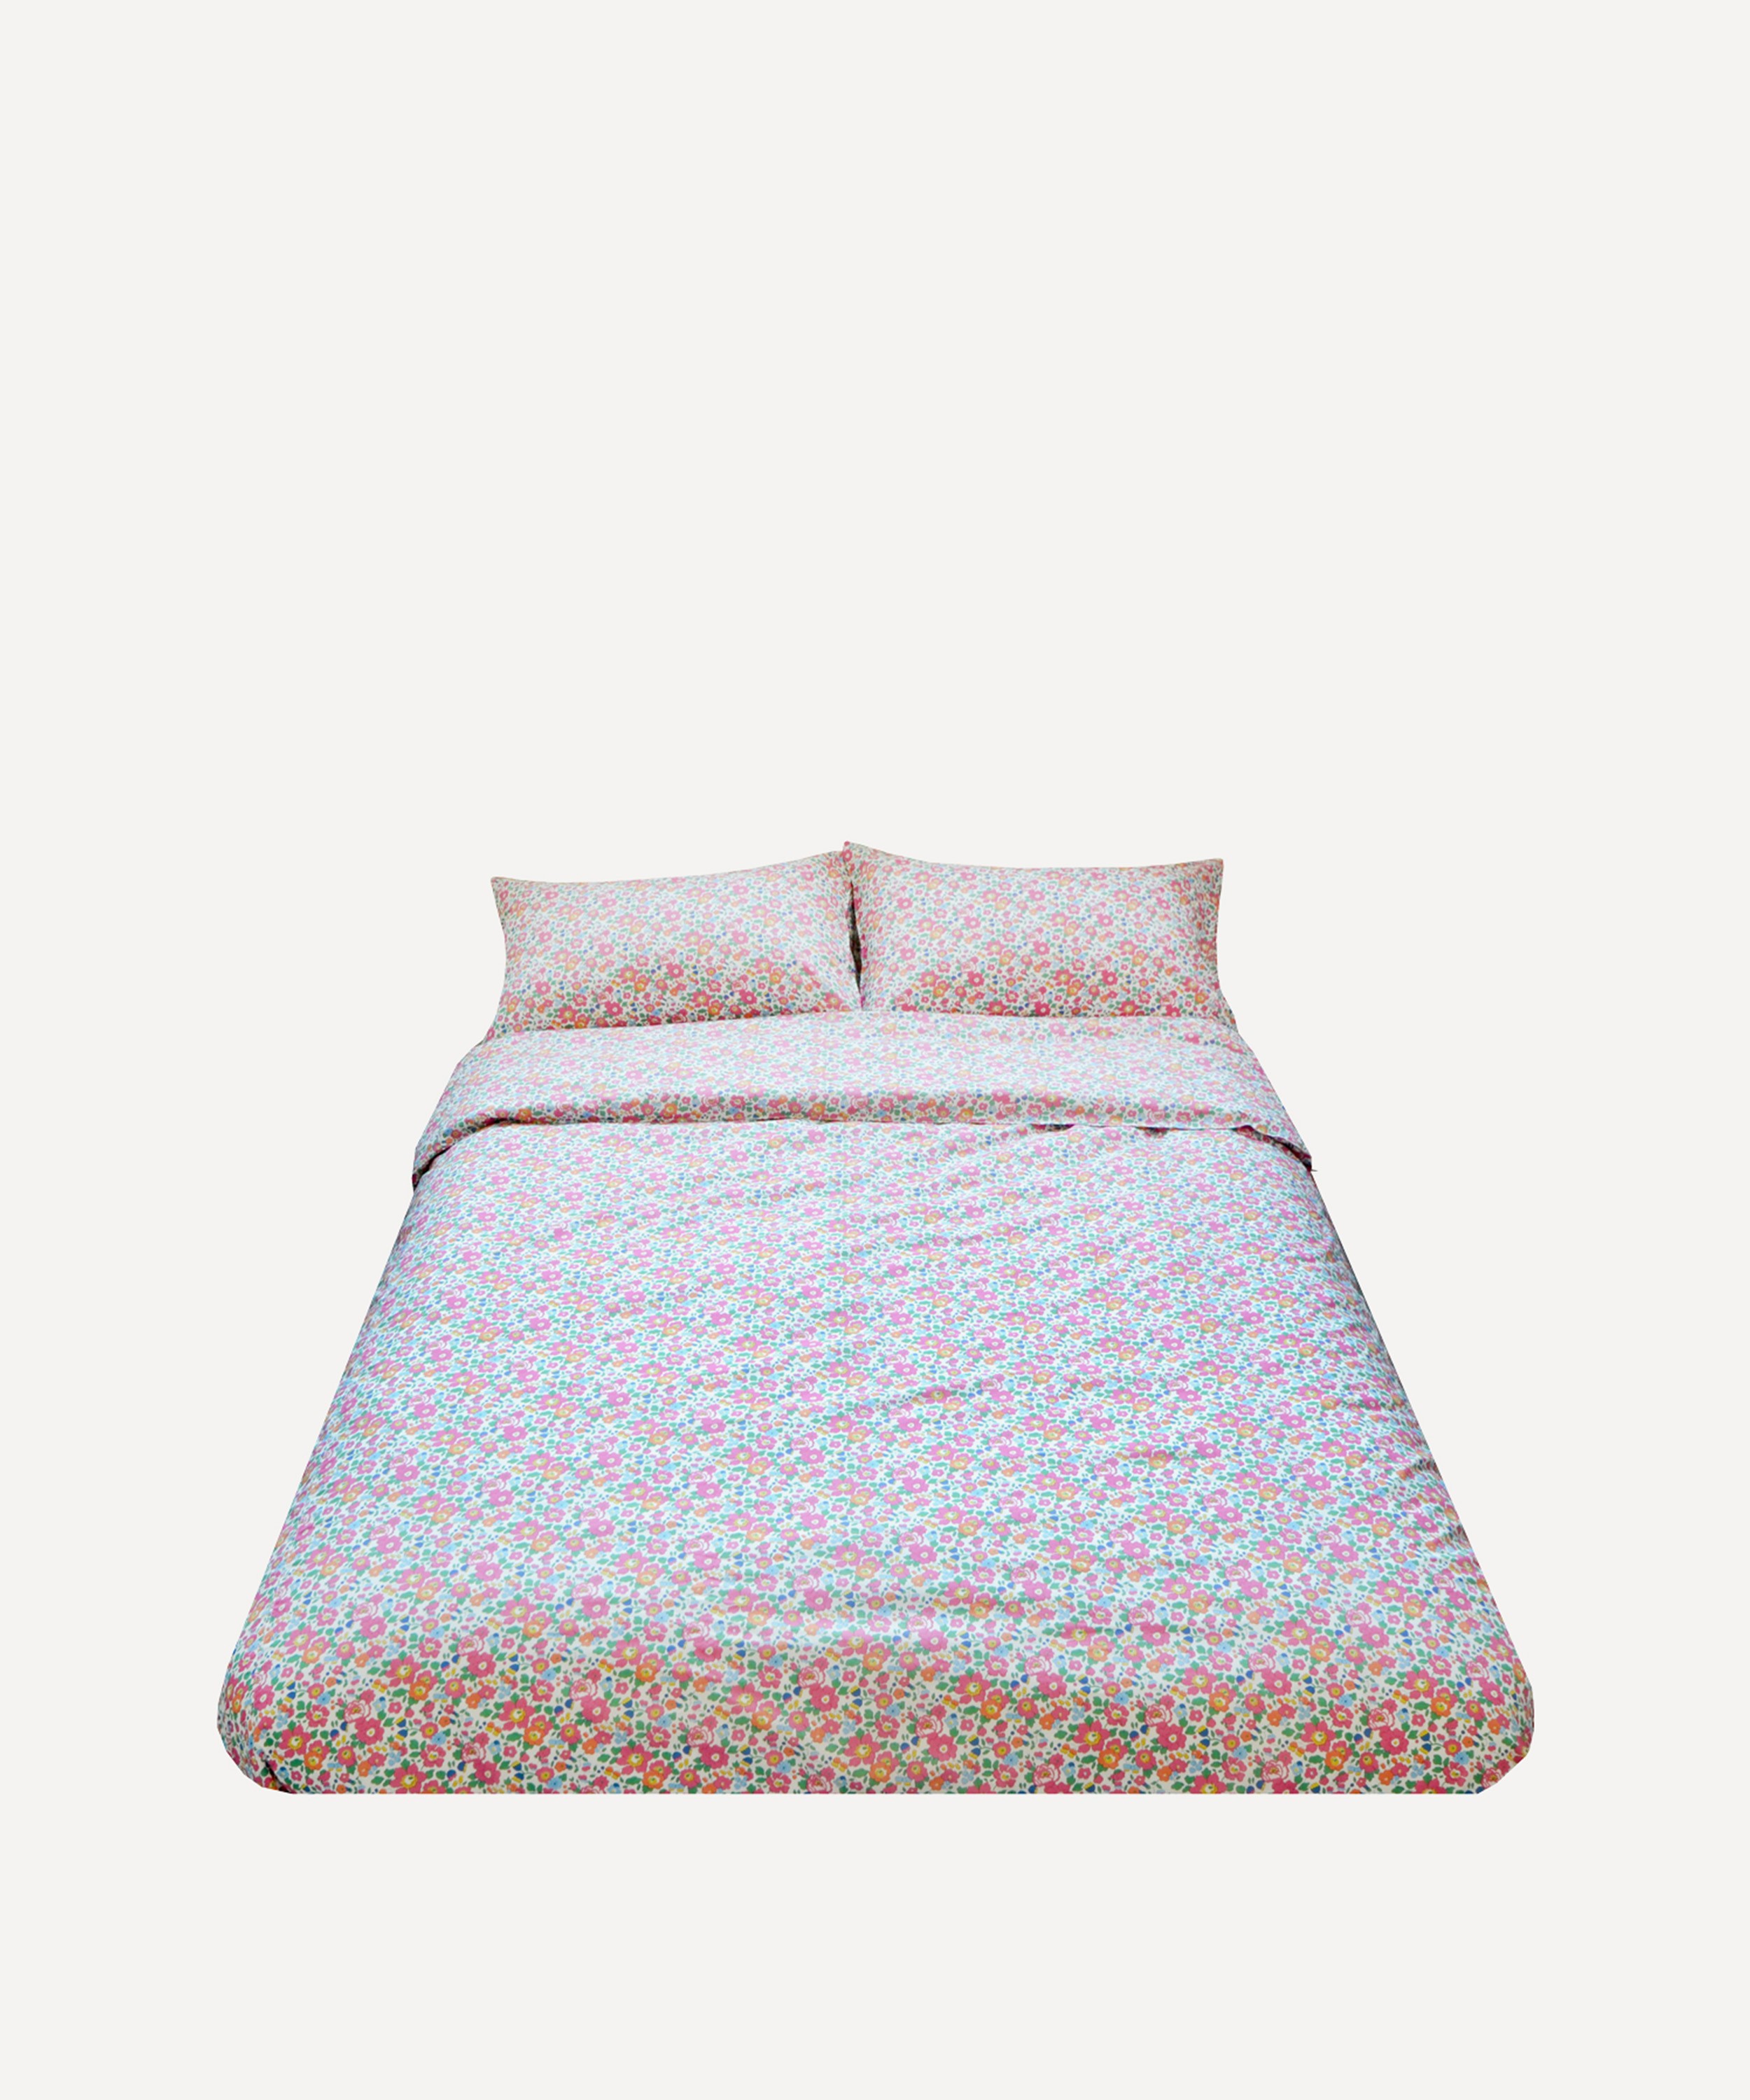 Coco & Wolf - Betsy Deep Pink Super King Duvet Cover Set